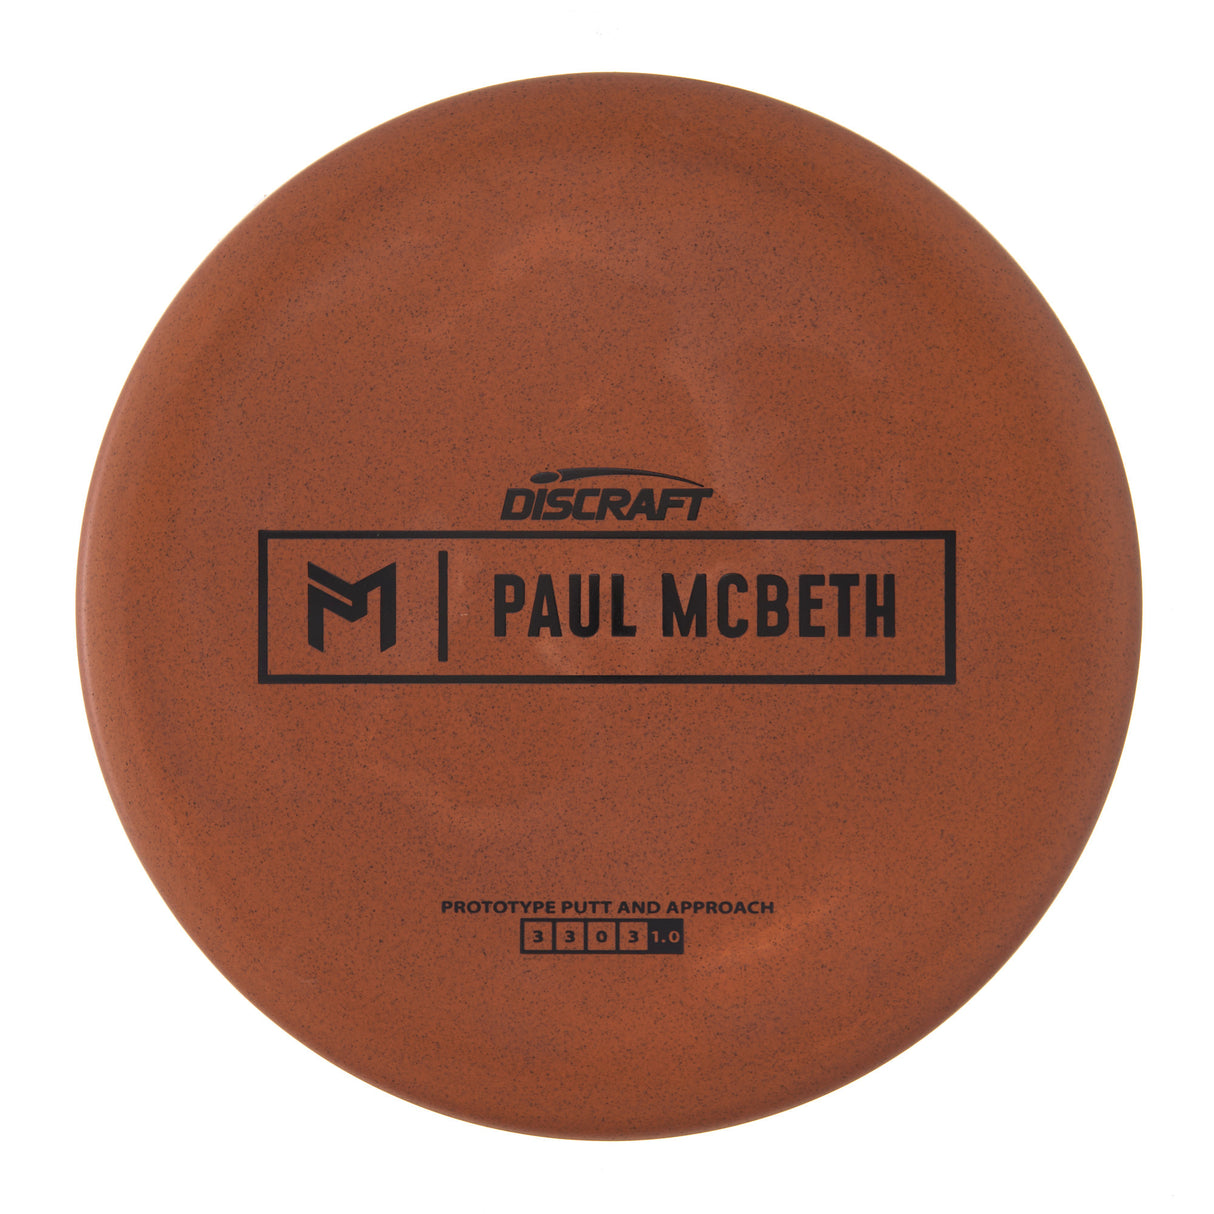 Discraft Kratos - Mcbeth Prototype Special Rubber Blend 174g | Style 0014